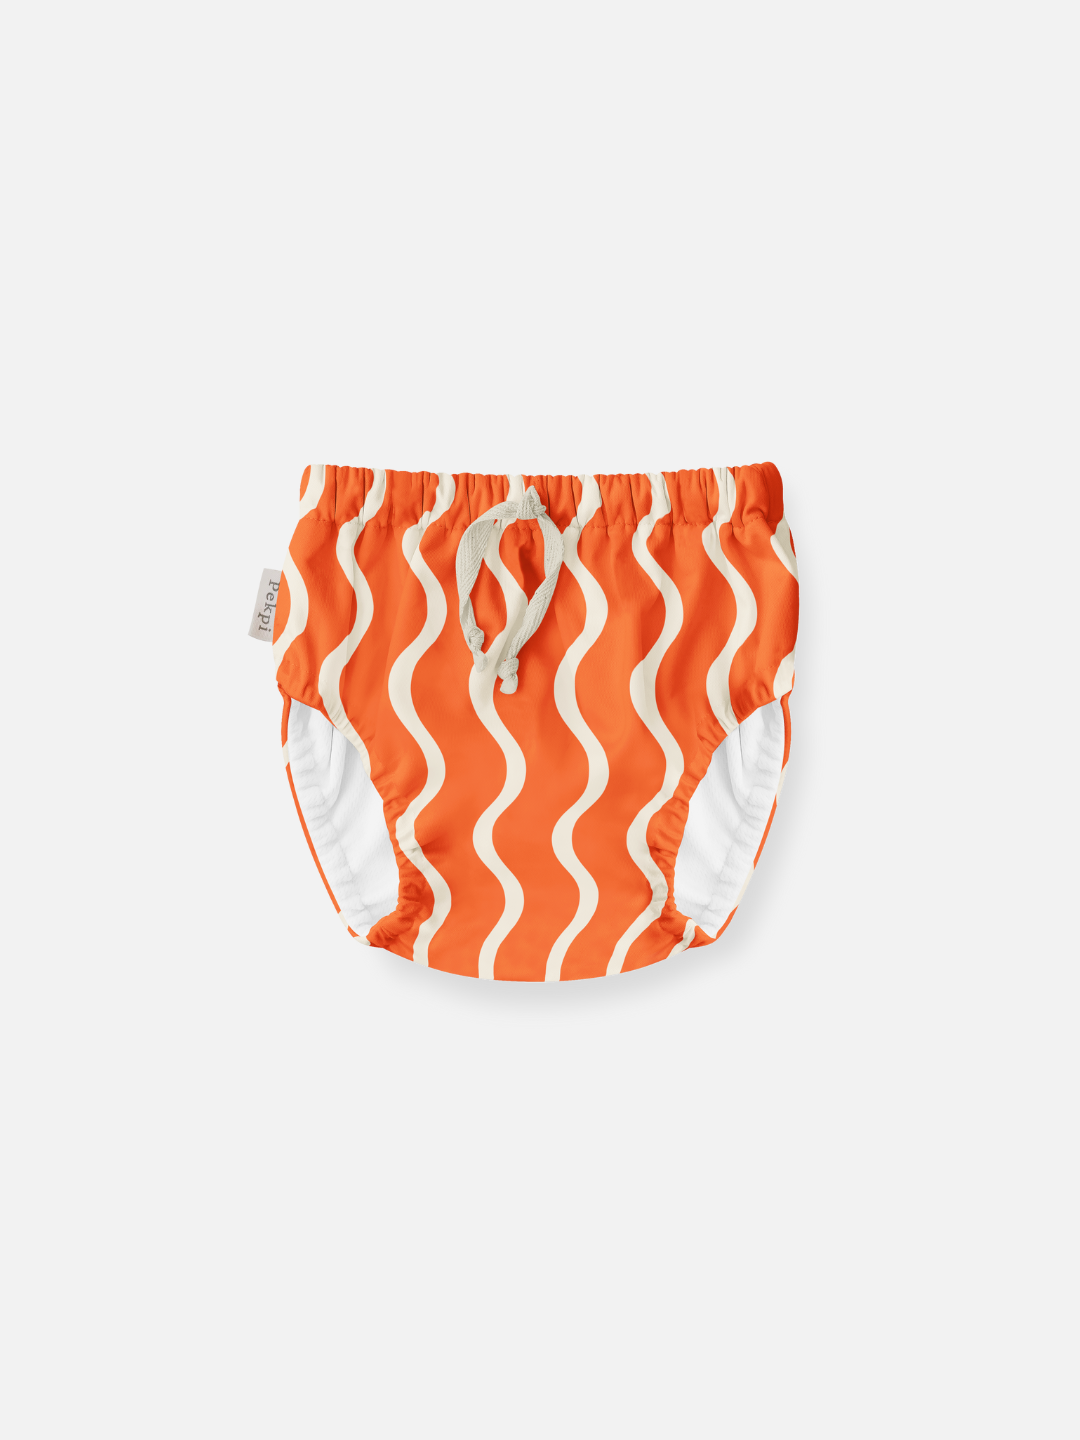 Spaghetti | The front view of the swim diaper with an elastic waist with a tie and elastic leg holes. The diaper is a bright orange with wavy and vertical cream colored lines.